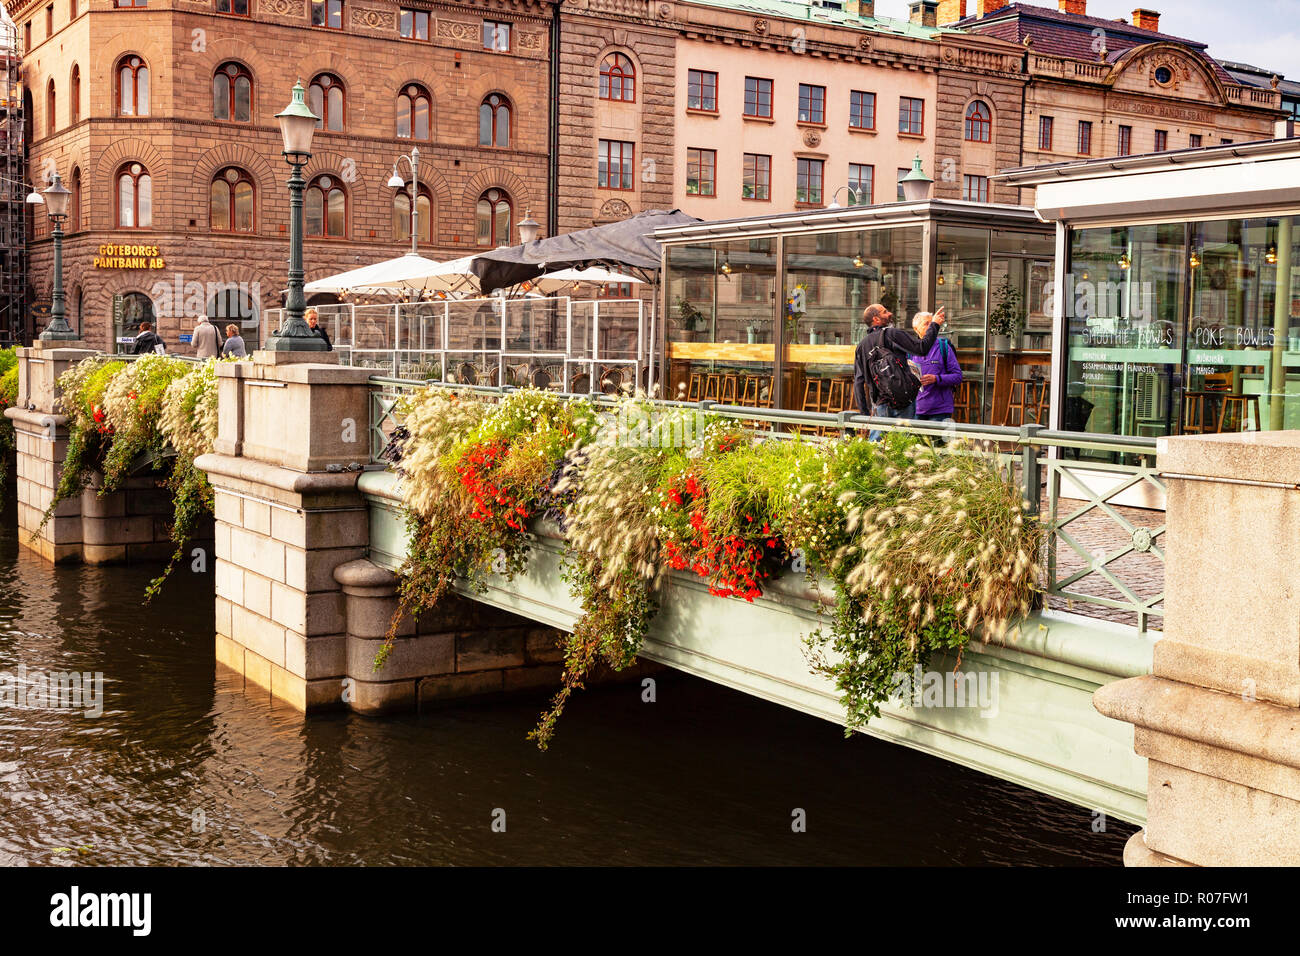 14 September 2018: Gothenburg, Sweden - The German Bridge, or Tyska Bron, with a floral display and tourists, crossing the Stora Hamn Canal. Stock Photo